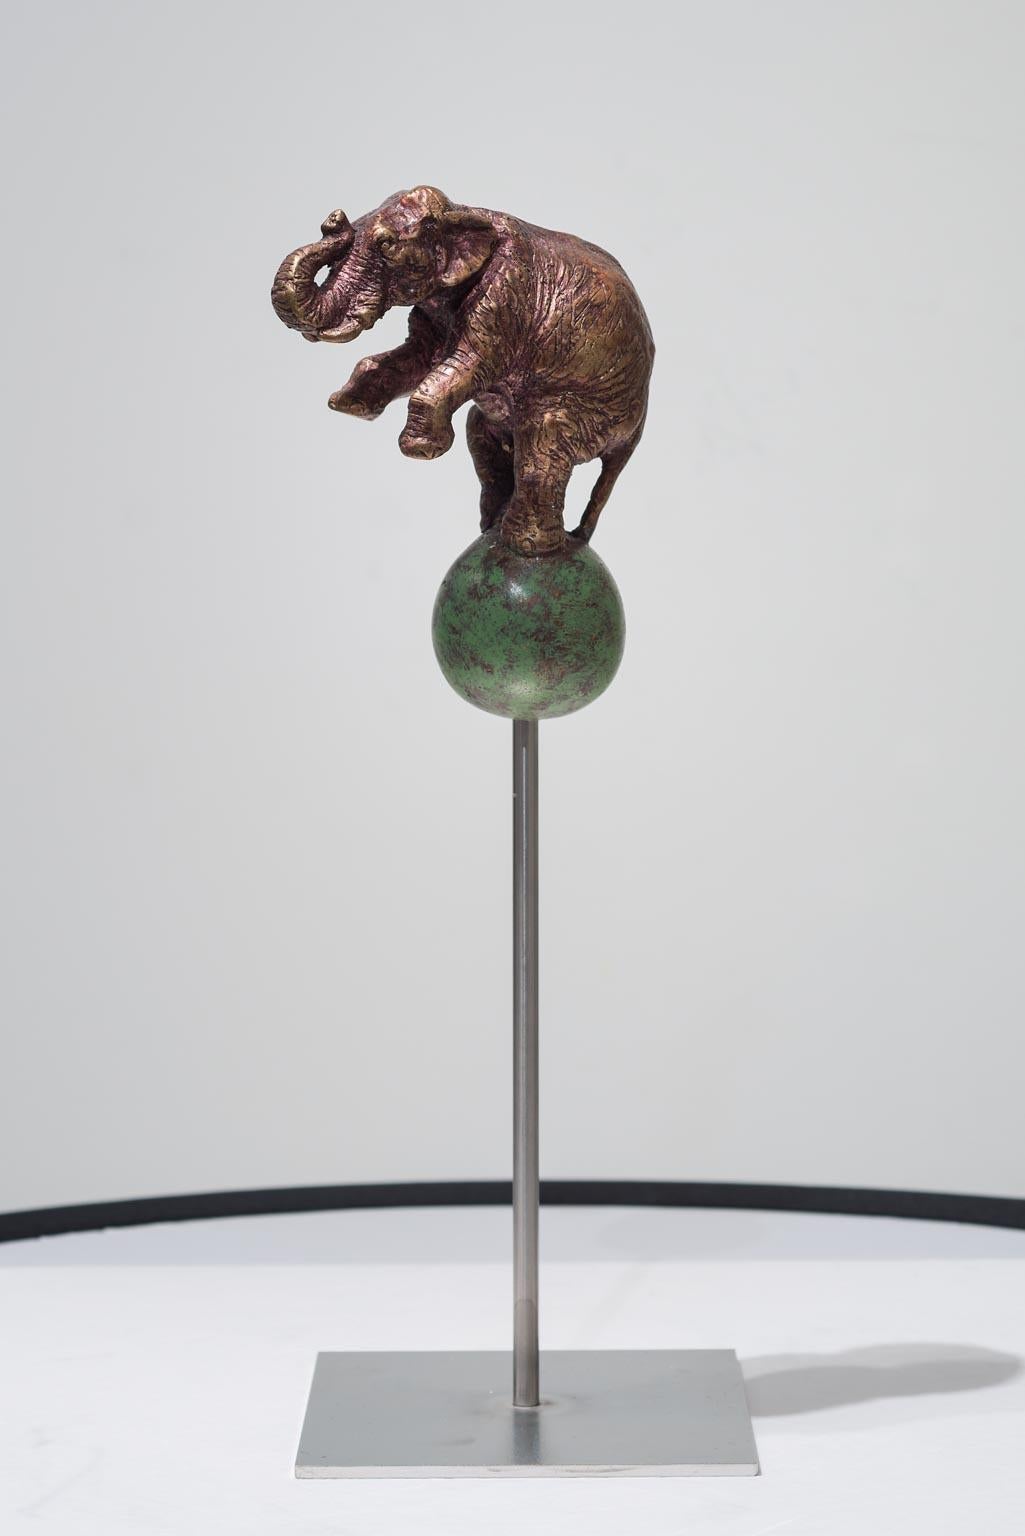 Rolf Knie  Figurative Sculpture - Elefant on Ball  bronze figurative animal sculpture of circus scene by Rolf Knie